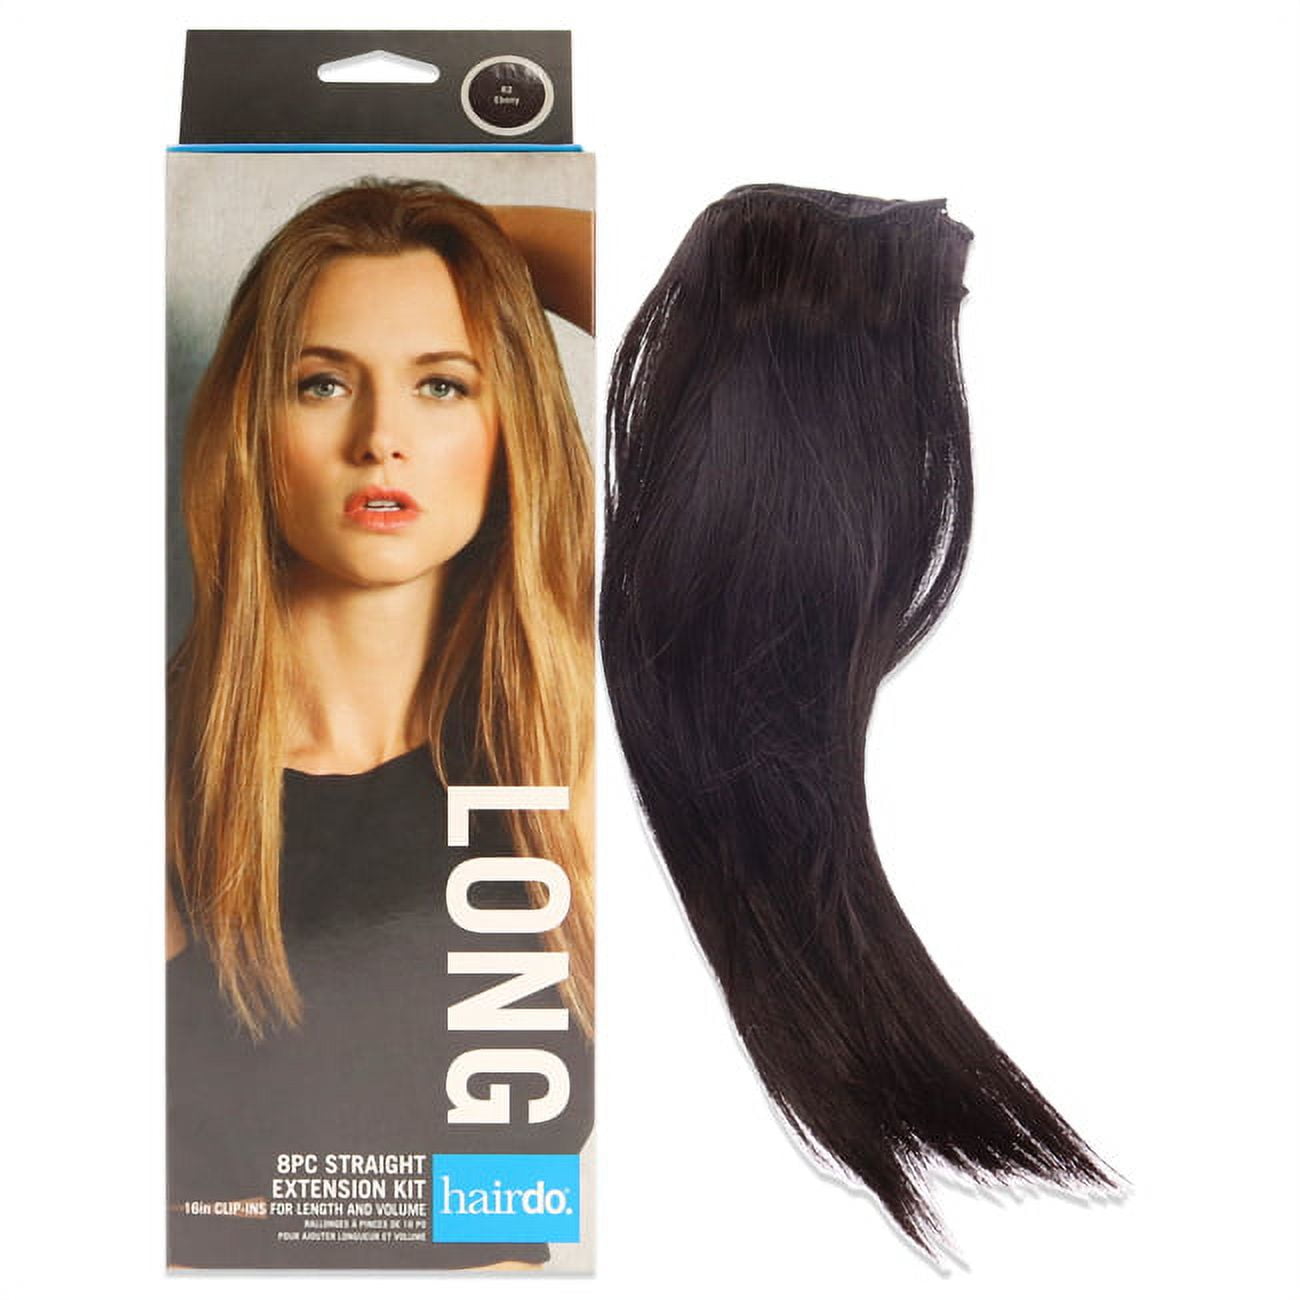 16 Remy Human Hair Extension Kit by Hairdo (5 pc)